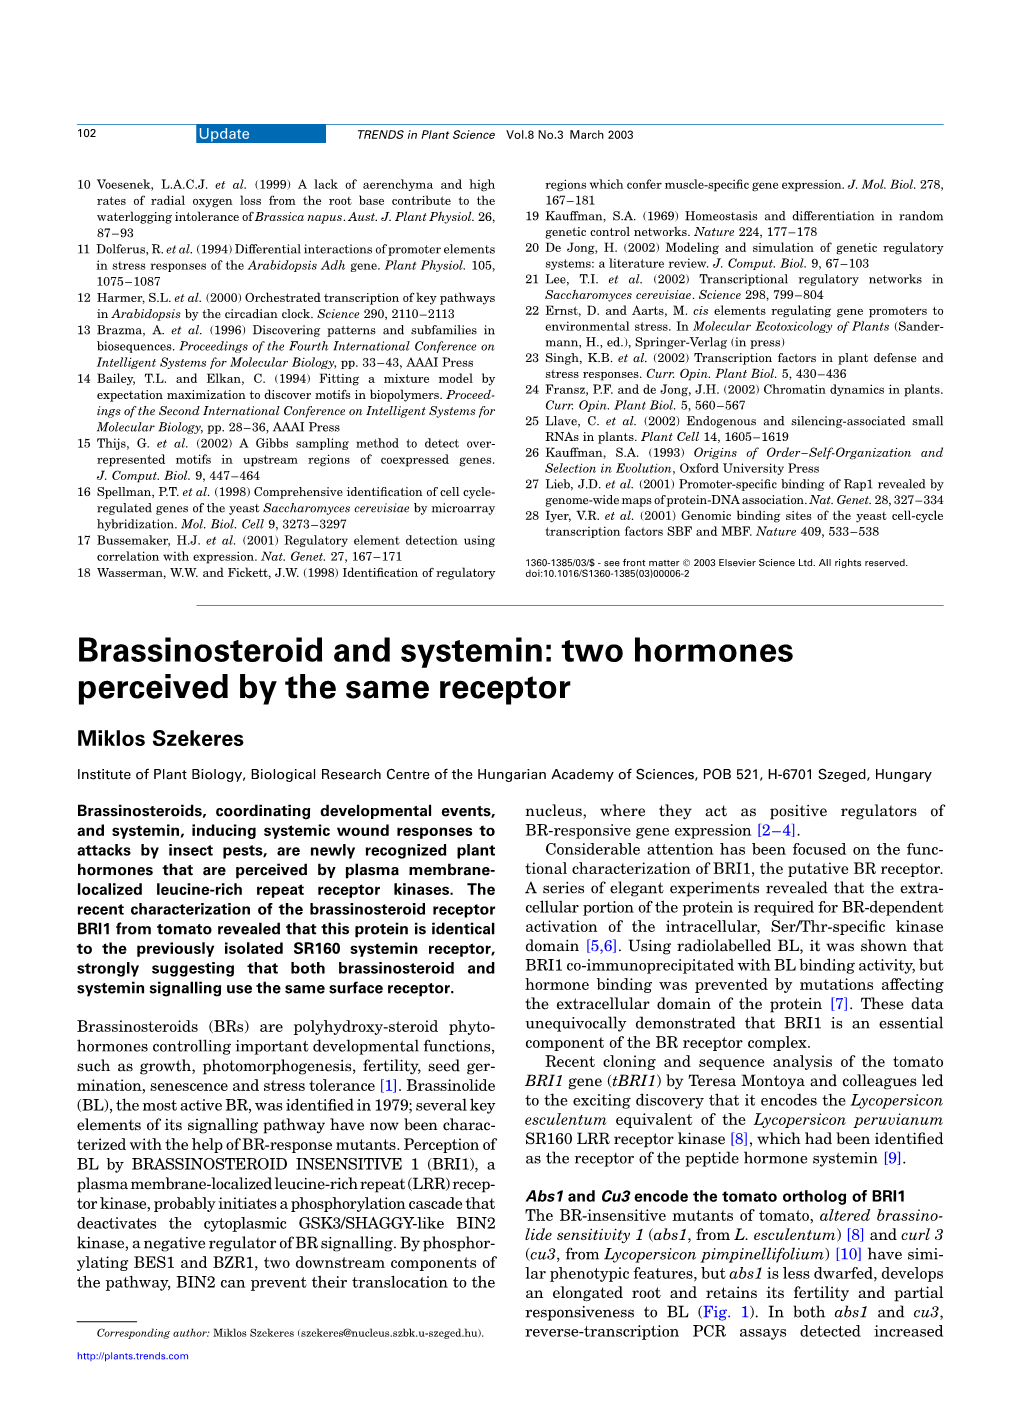 Brassinosteroid and Systemin: Two Hormones Perceived by the Same Receptor